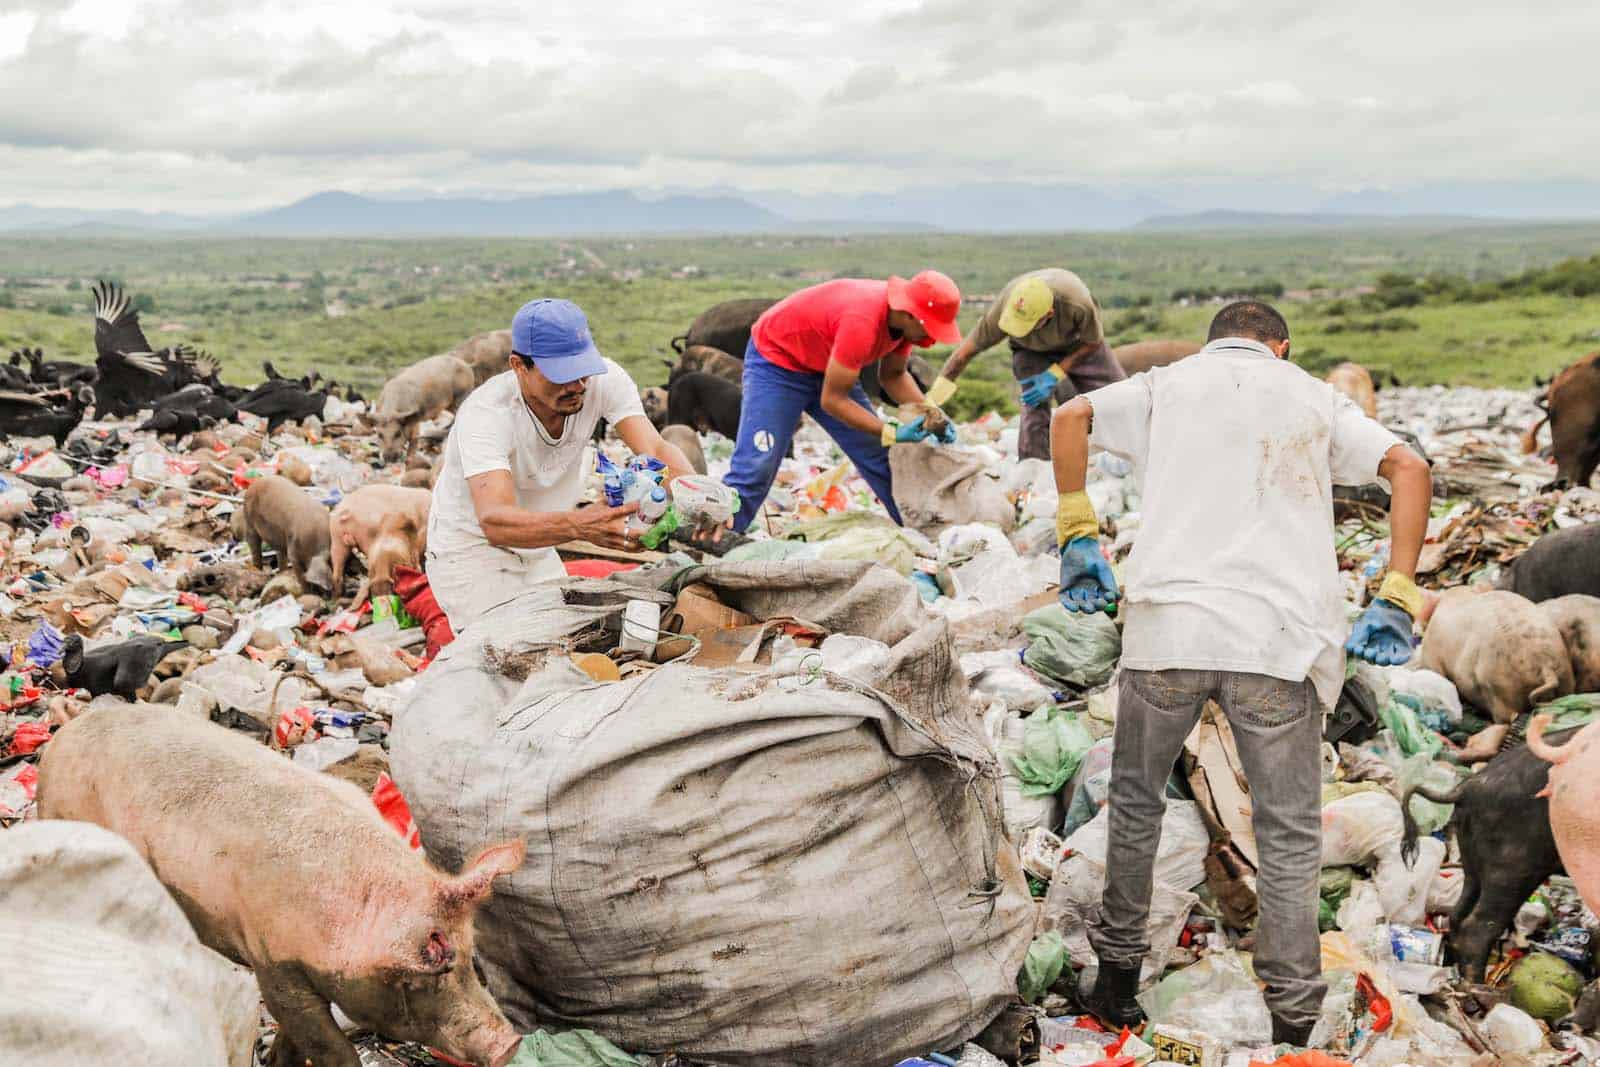 Trash pickers stand on piles of garbage, searching for plastic, surrounded by pigs and vultures.